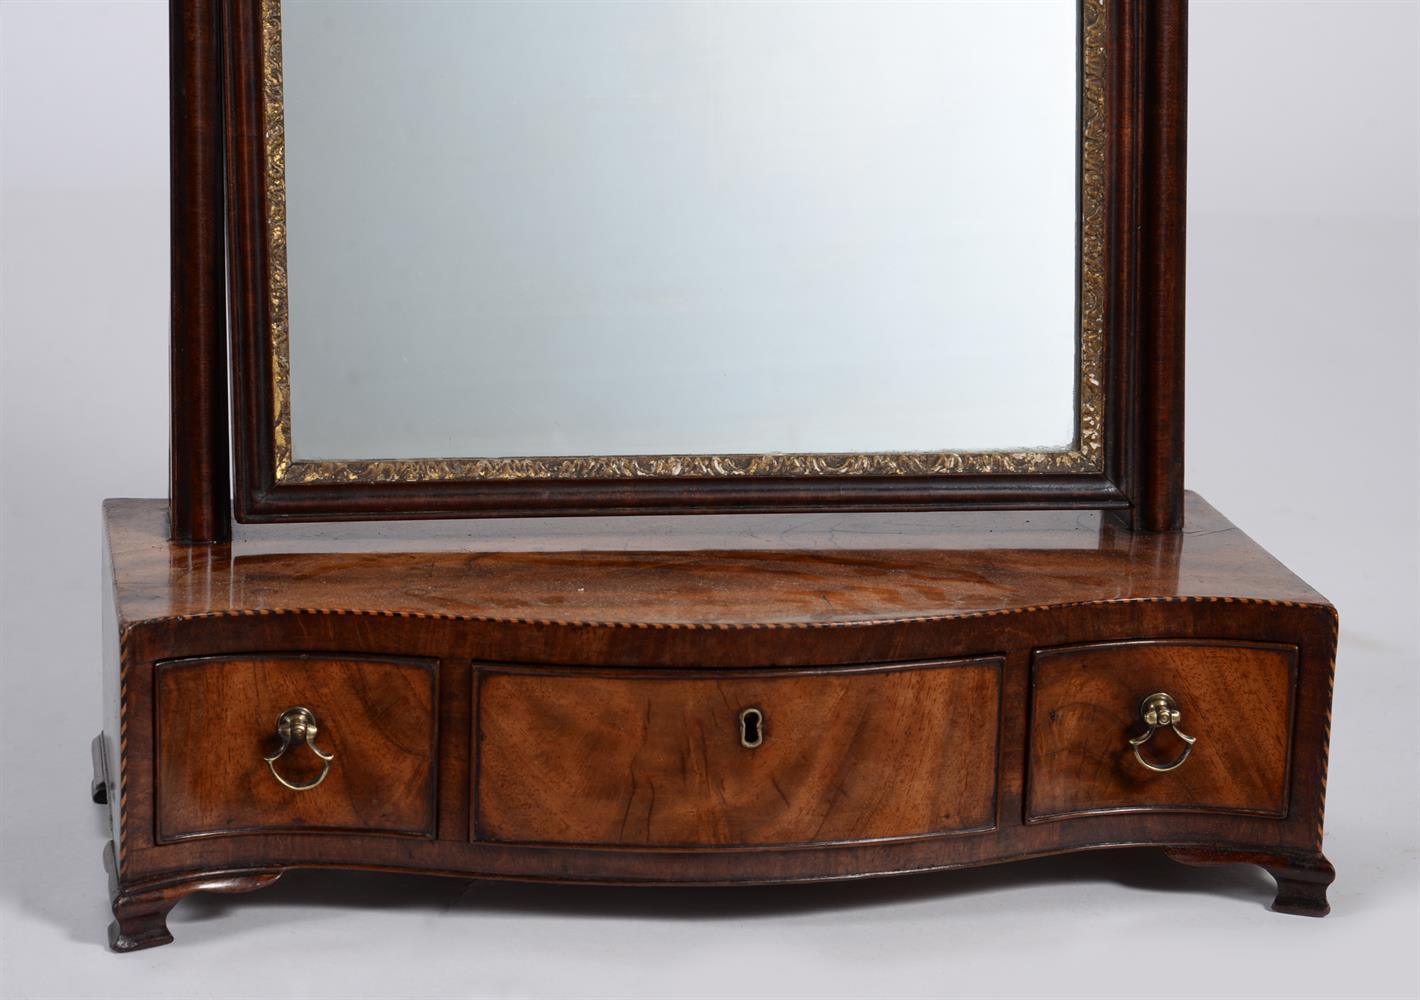 A GEORGE II MAHOGANY AND PARCEL GILT DRESSING TABLE MIRROR - Image 3 of 3